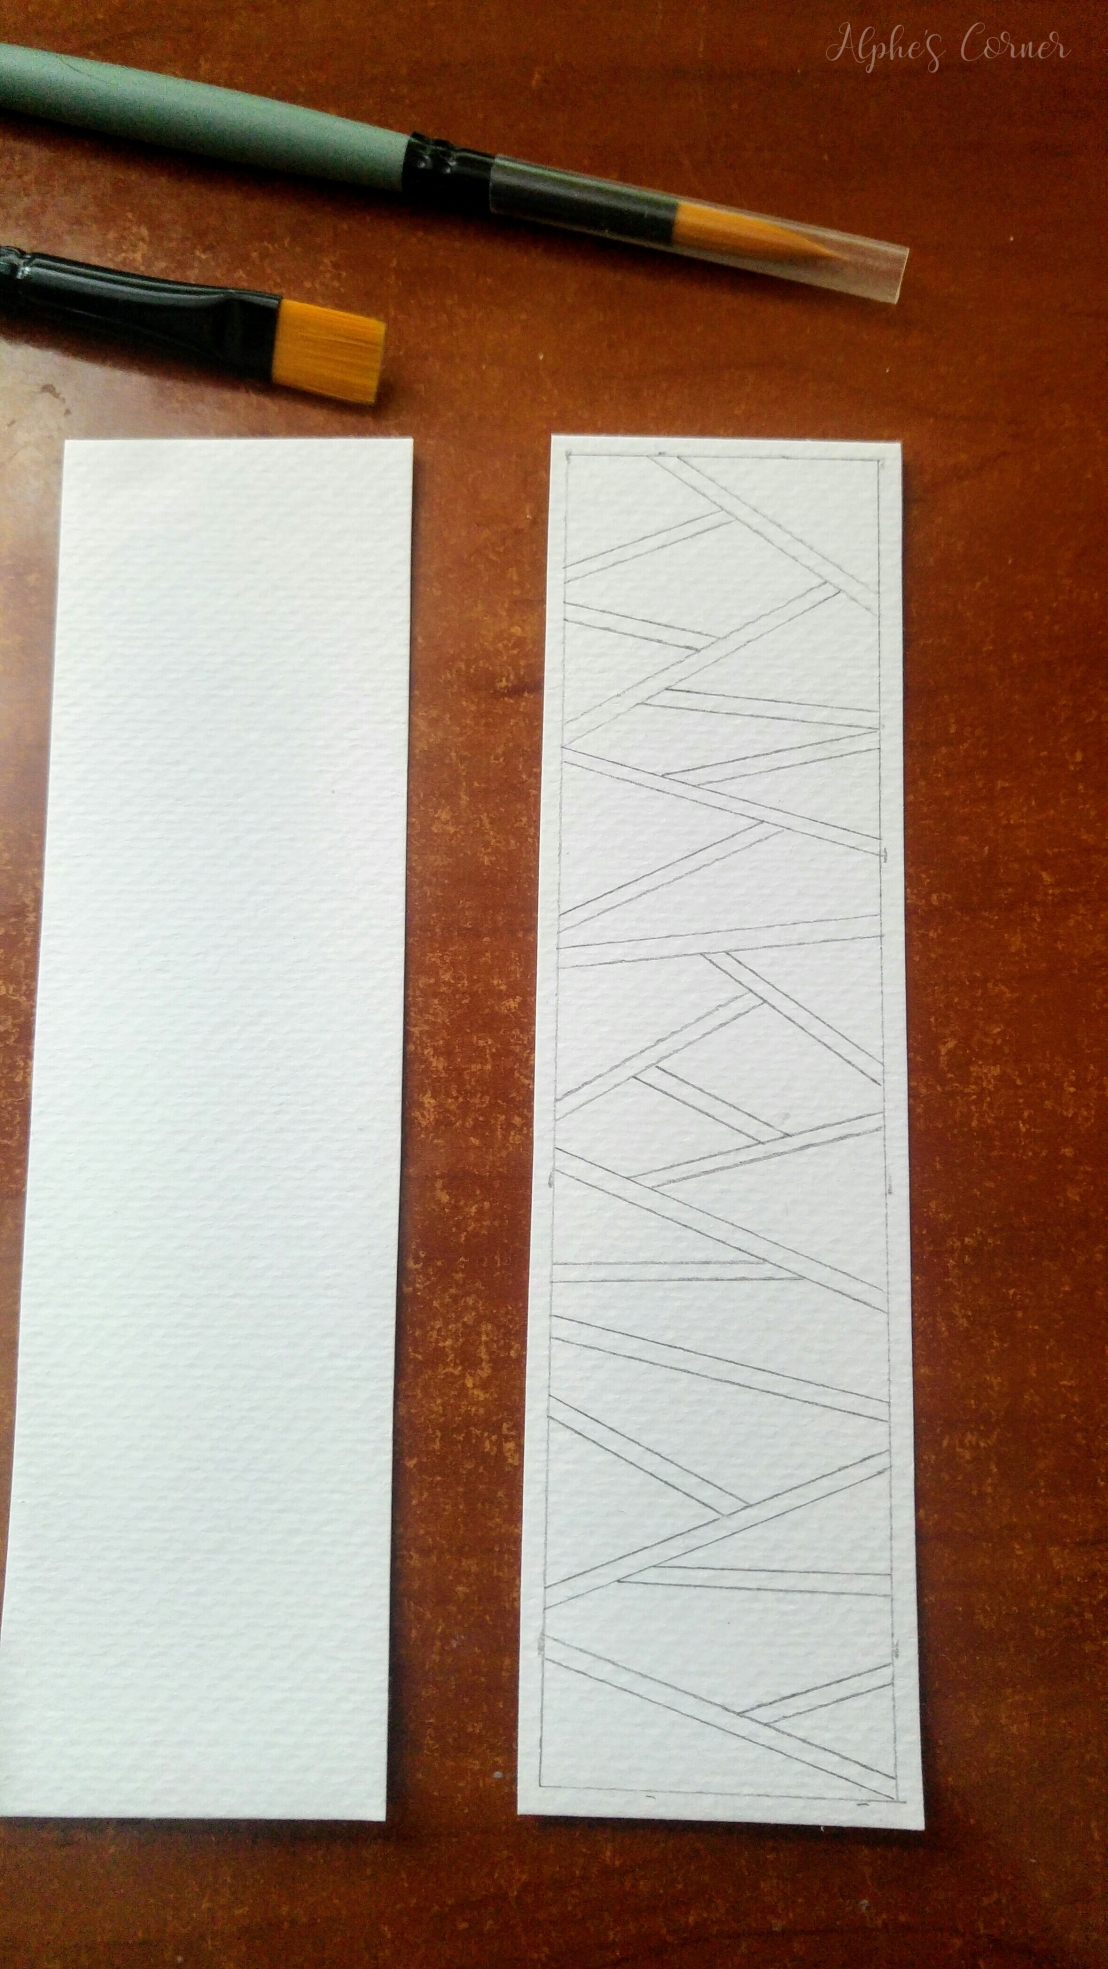 Sketching a geometric pattern on a bookmark